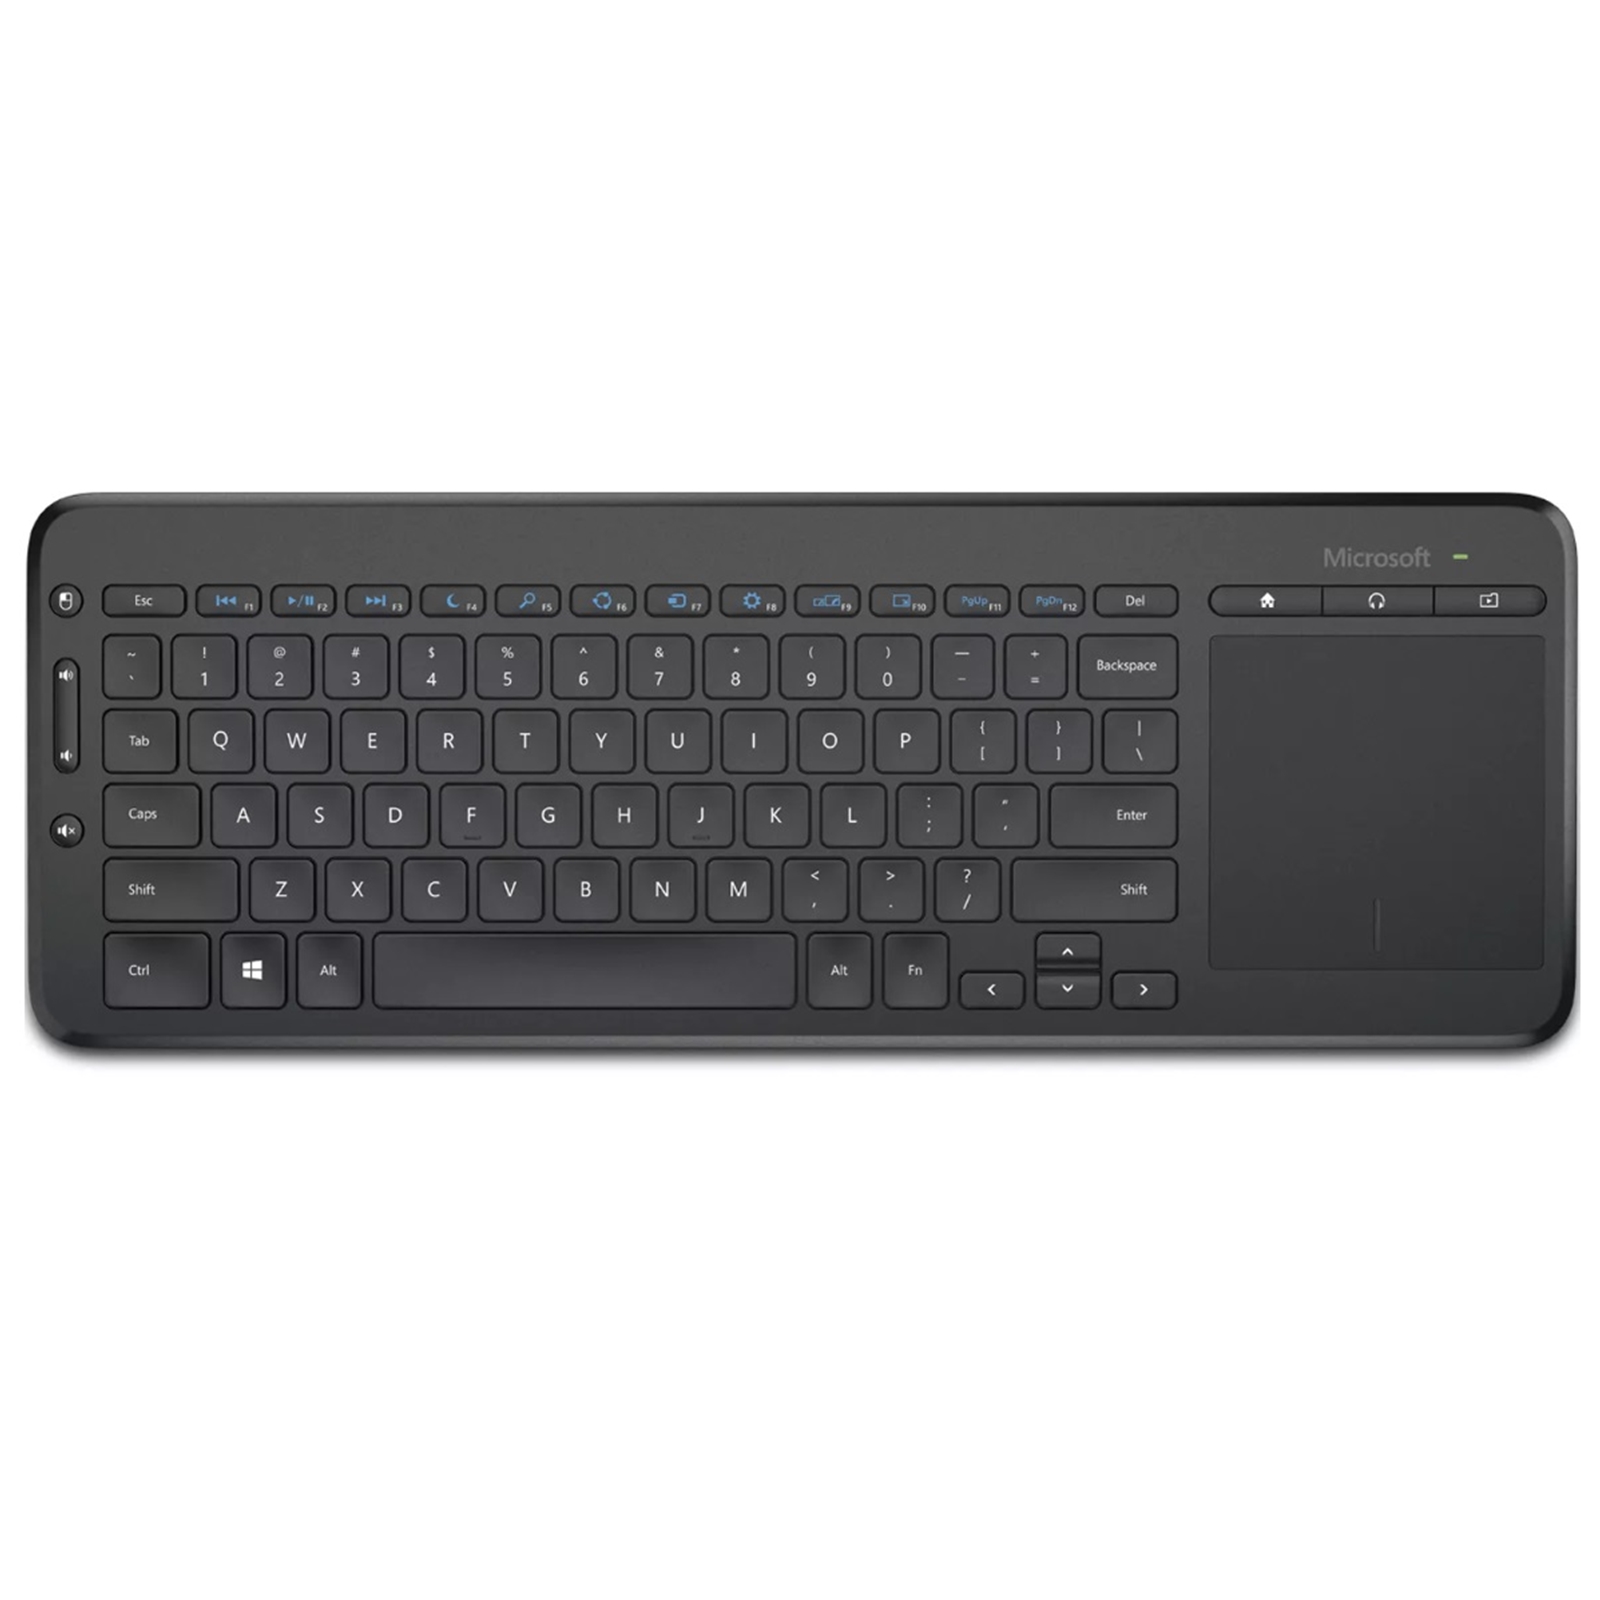 Microsoft All-in-One Wireless Media Keyboard with Integrated Trackpad, Spill-Resistant, Customisable Media Hotkeys, Compatible with Windows, Mac, Android, Smart TV's and Consoles, UK English Layout